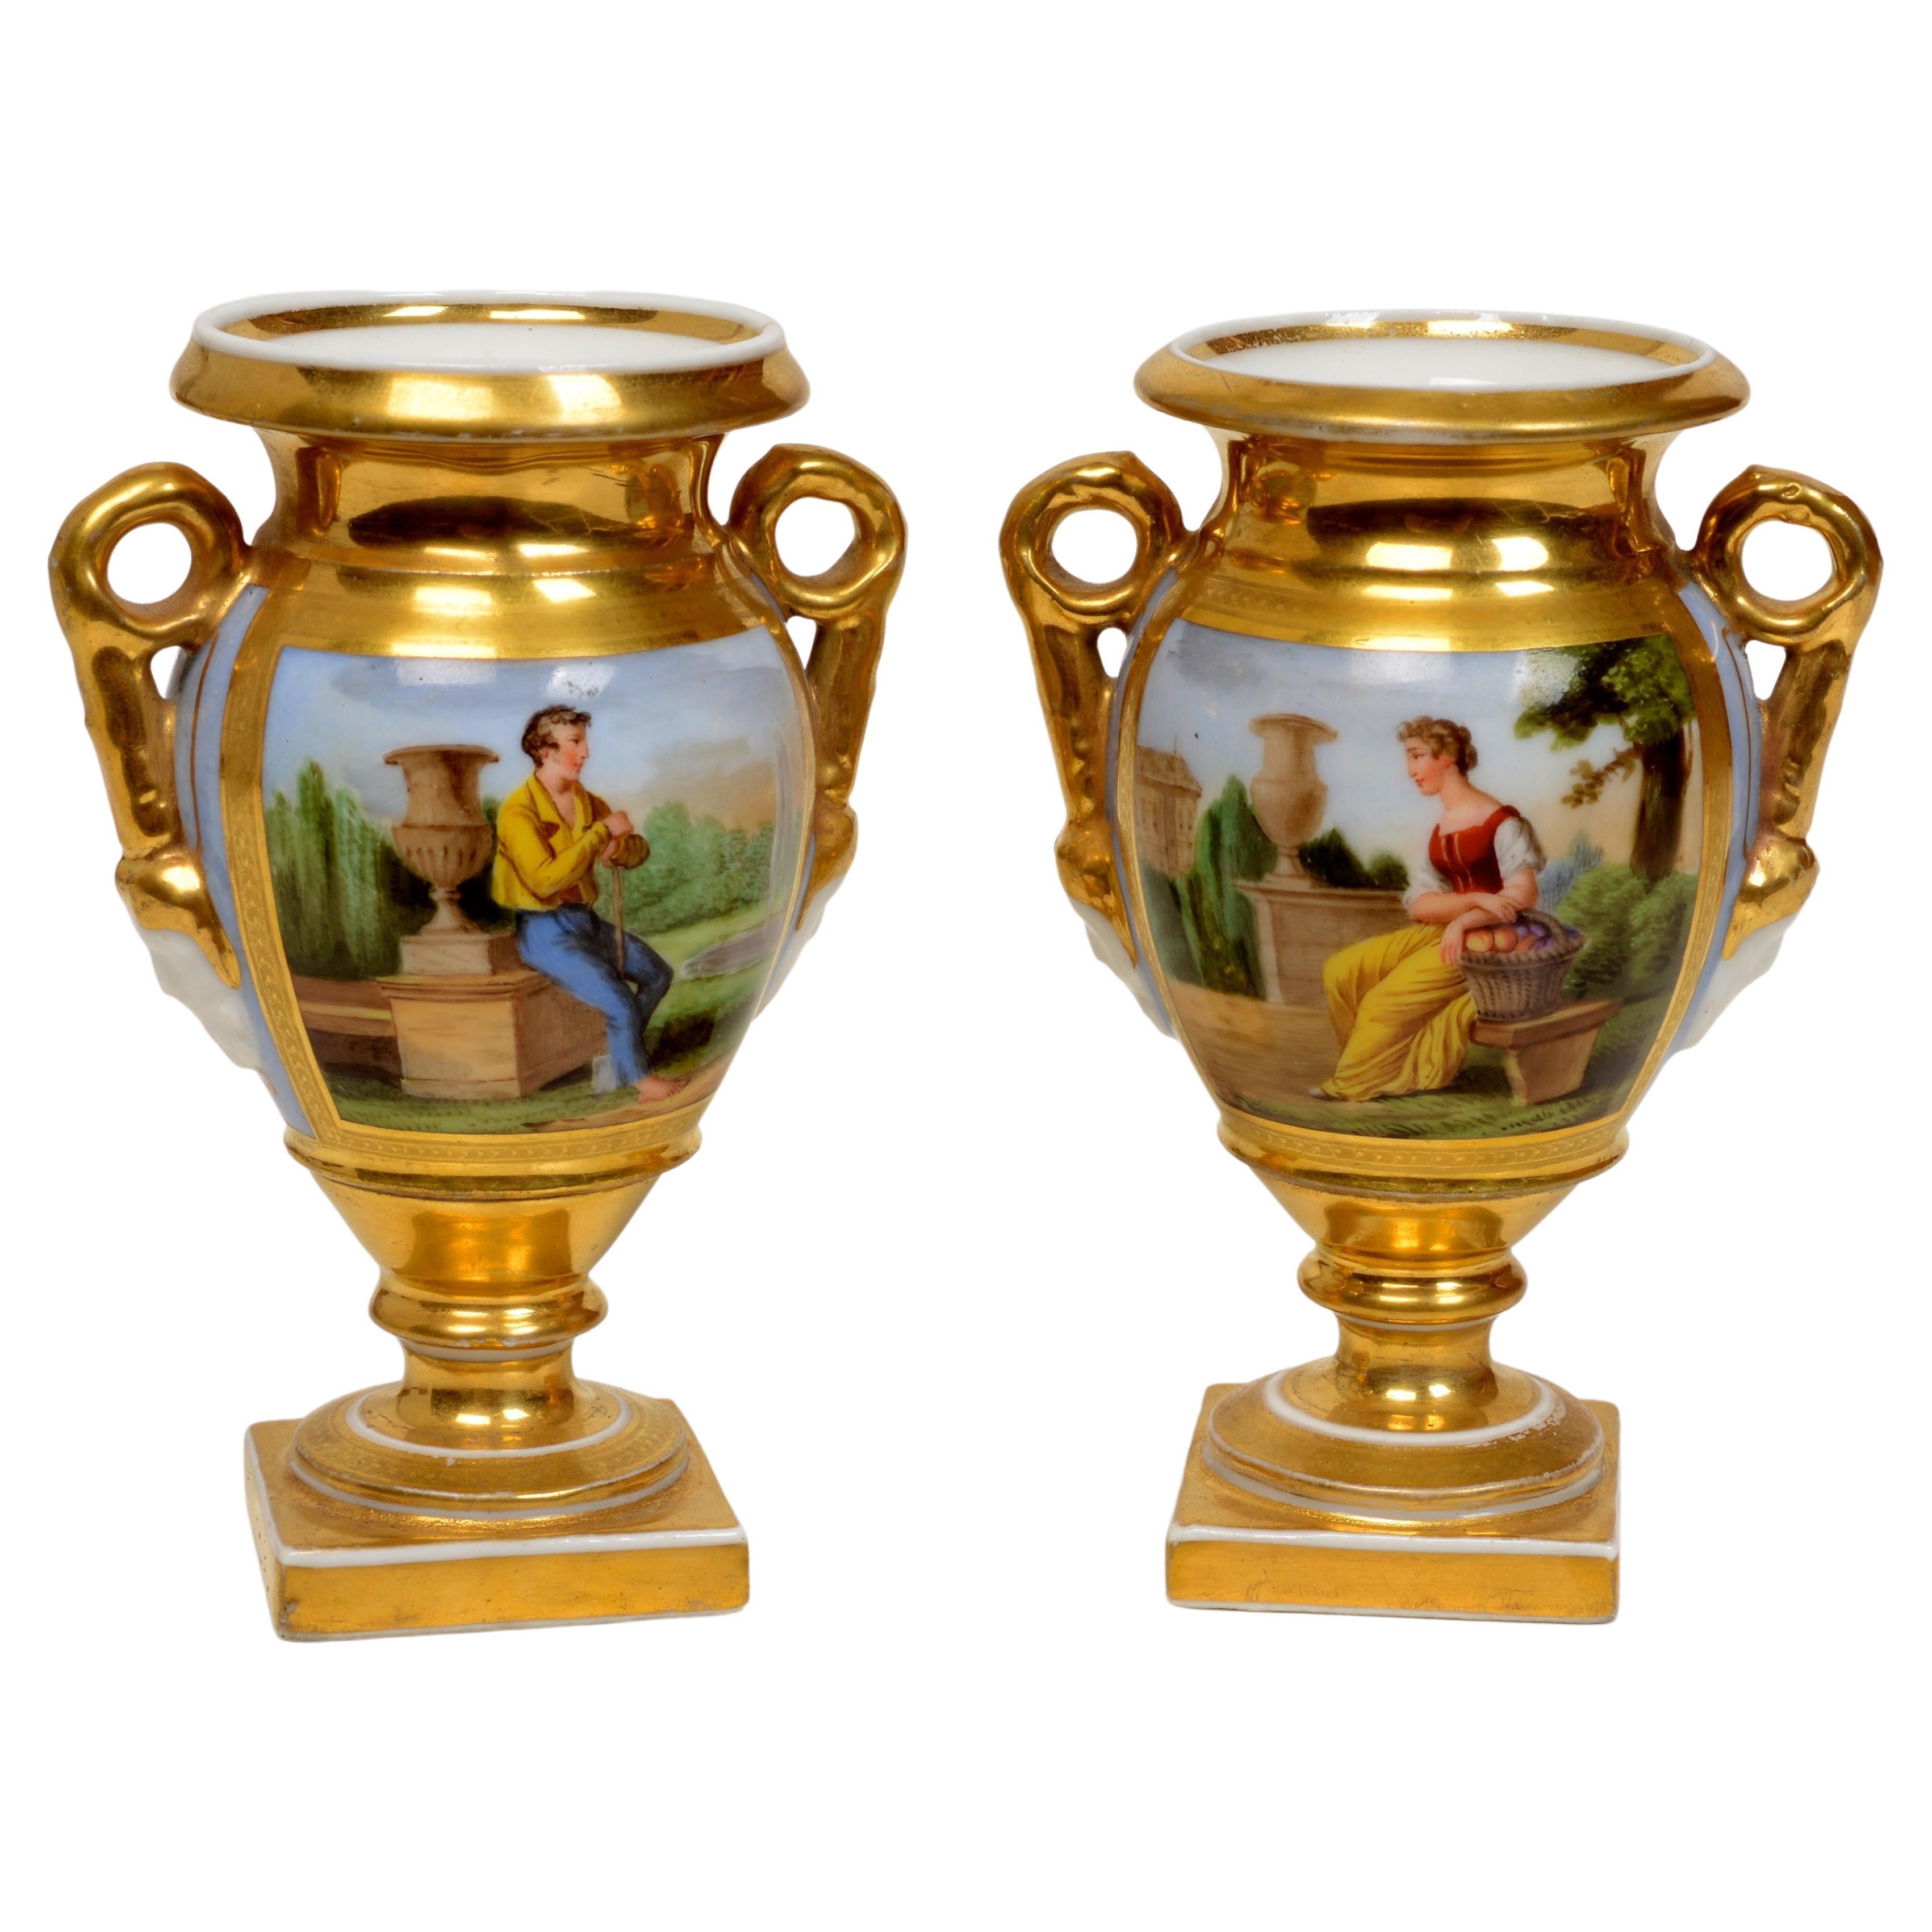 Pr. of Old Paris Miniature, Gilt Decorated Footed Urns With Garden Scenes, c1800 For Sale